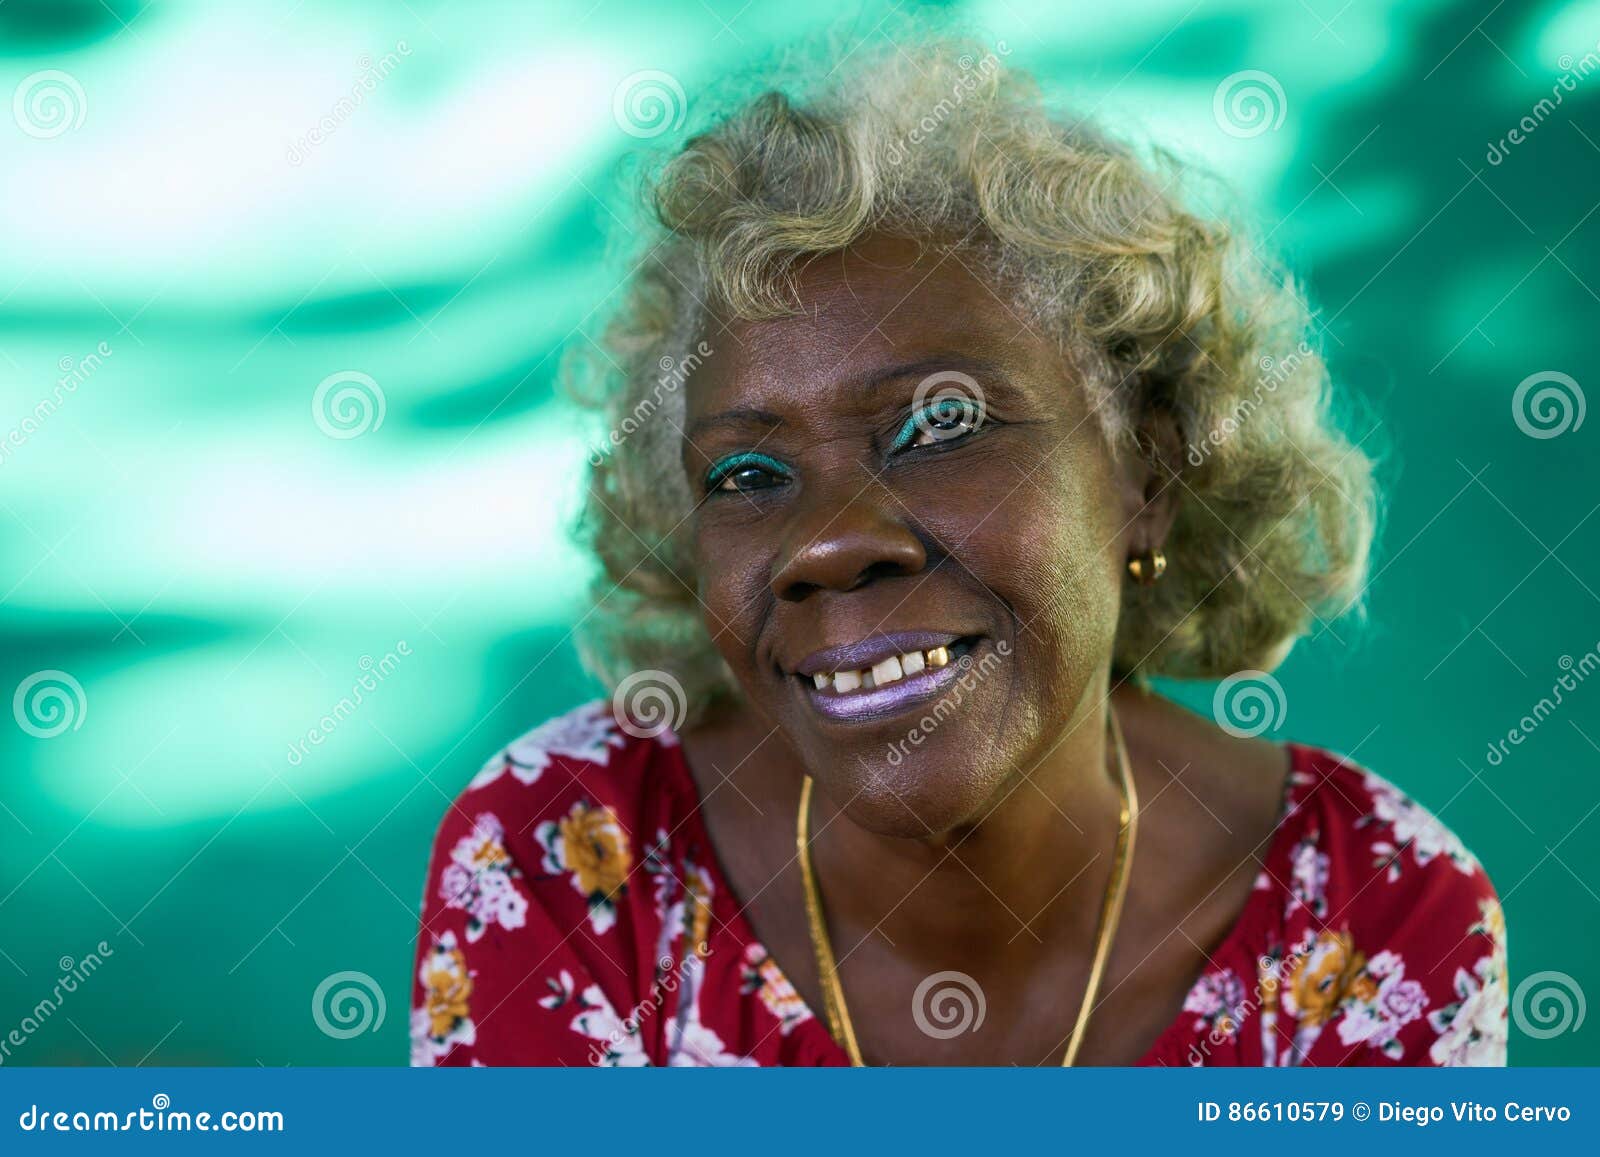 Real People Portrait Funny Elderly Woman Hispanic Lady Laughing Stock Image  - Image of funny, black: 86610579